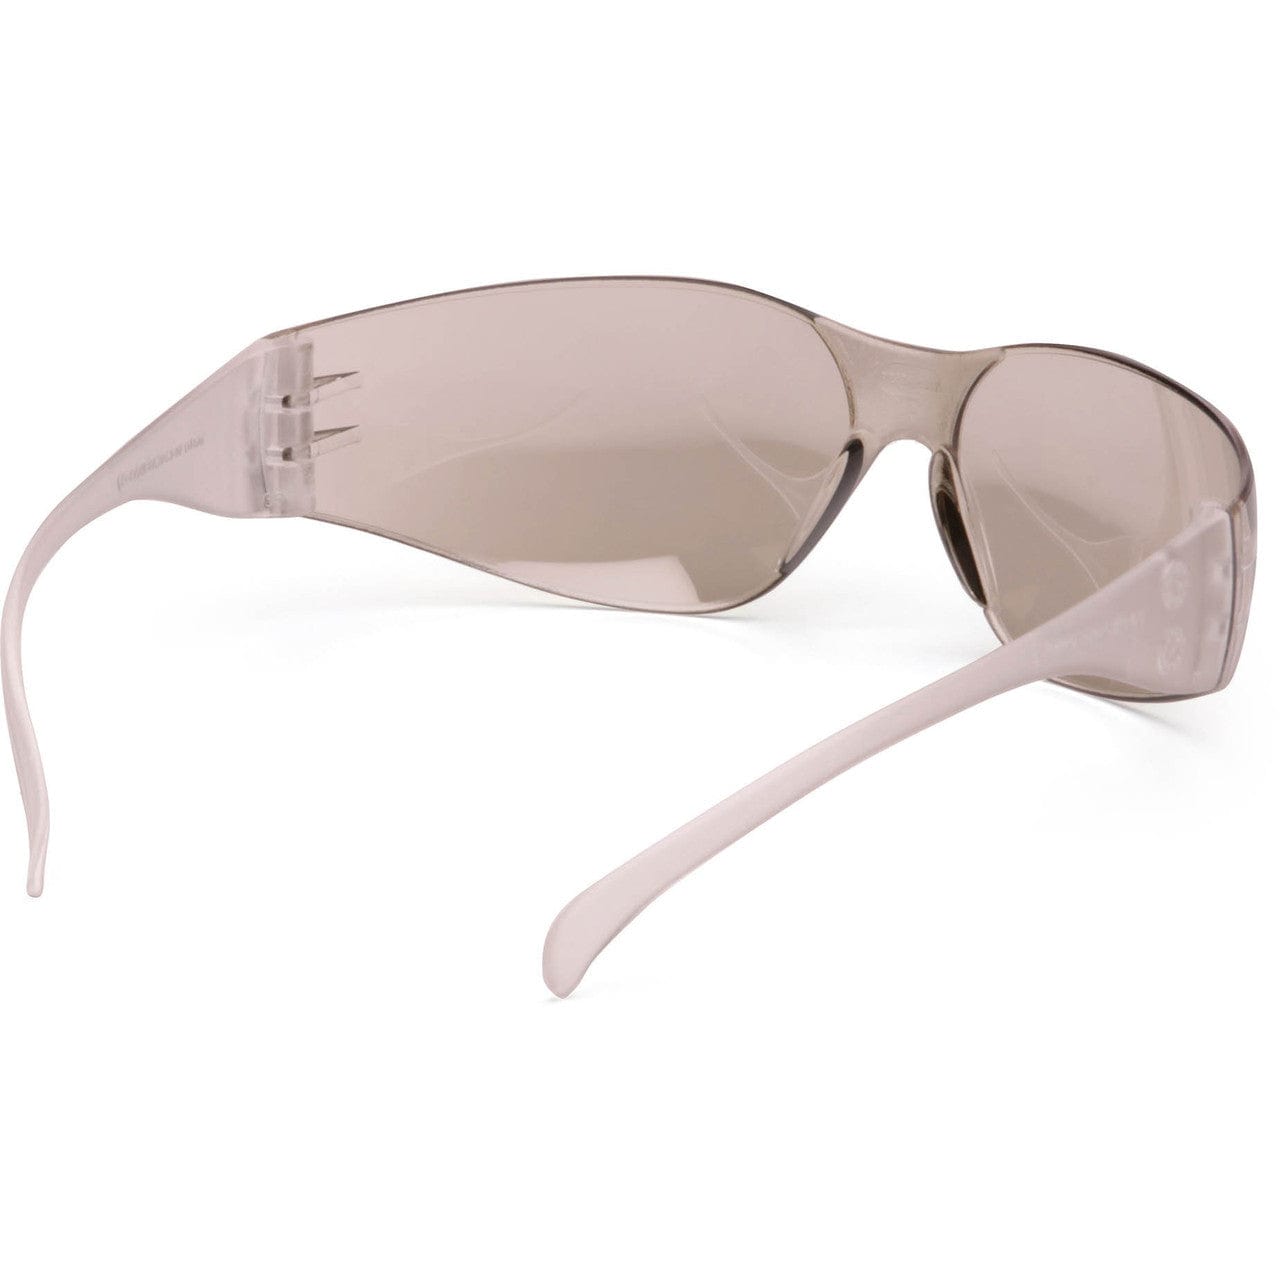 Pyramex Intruder Safety Glasses with Indoor/Outdoor Lens S4180S Inside View